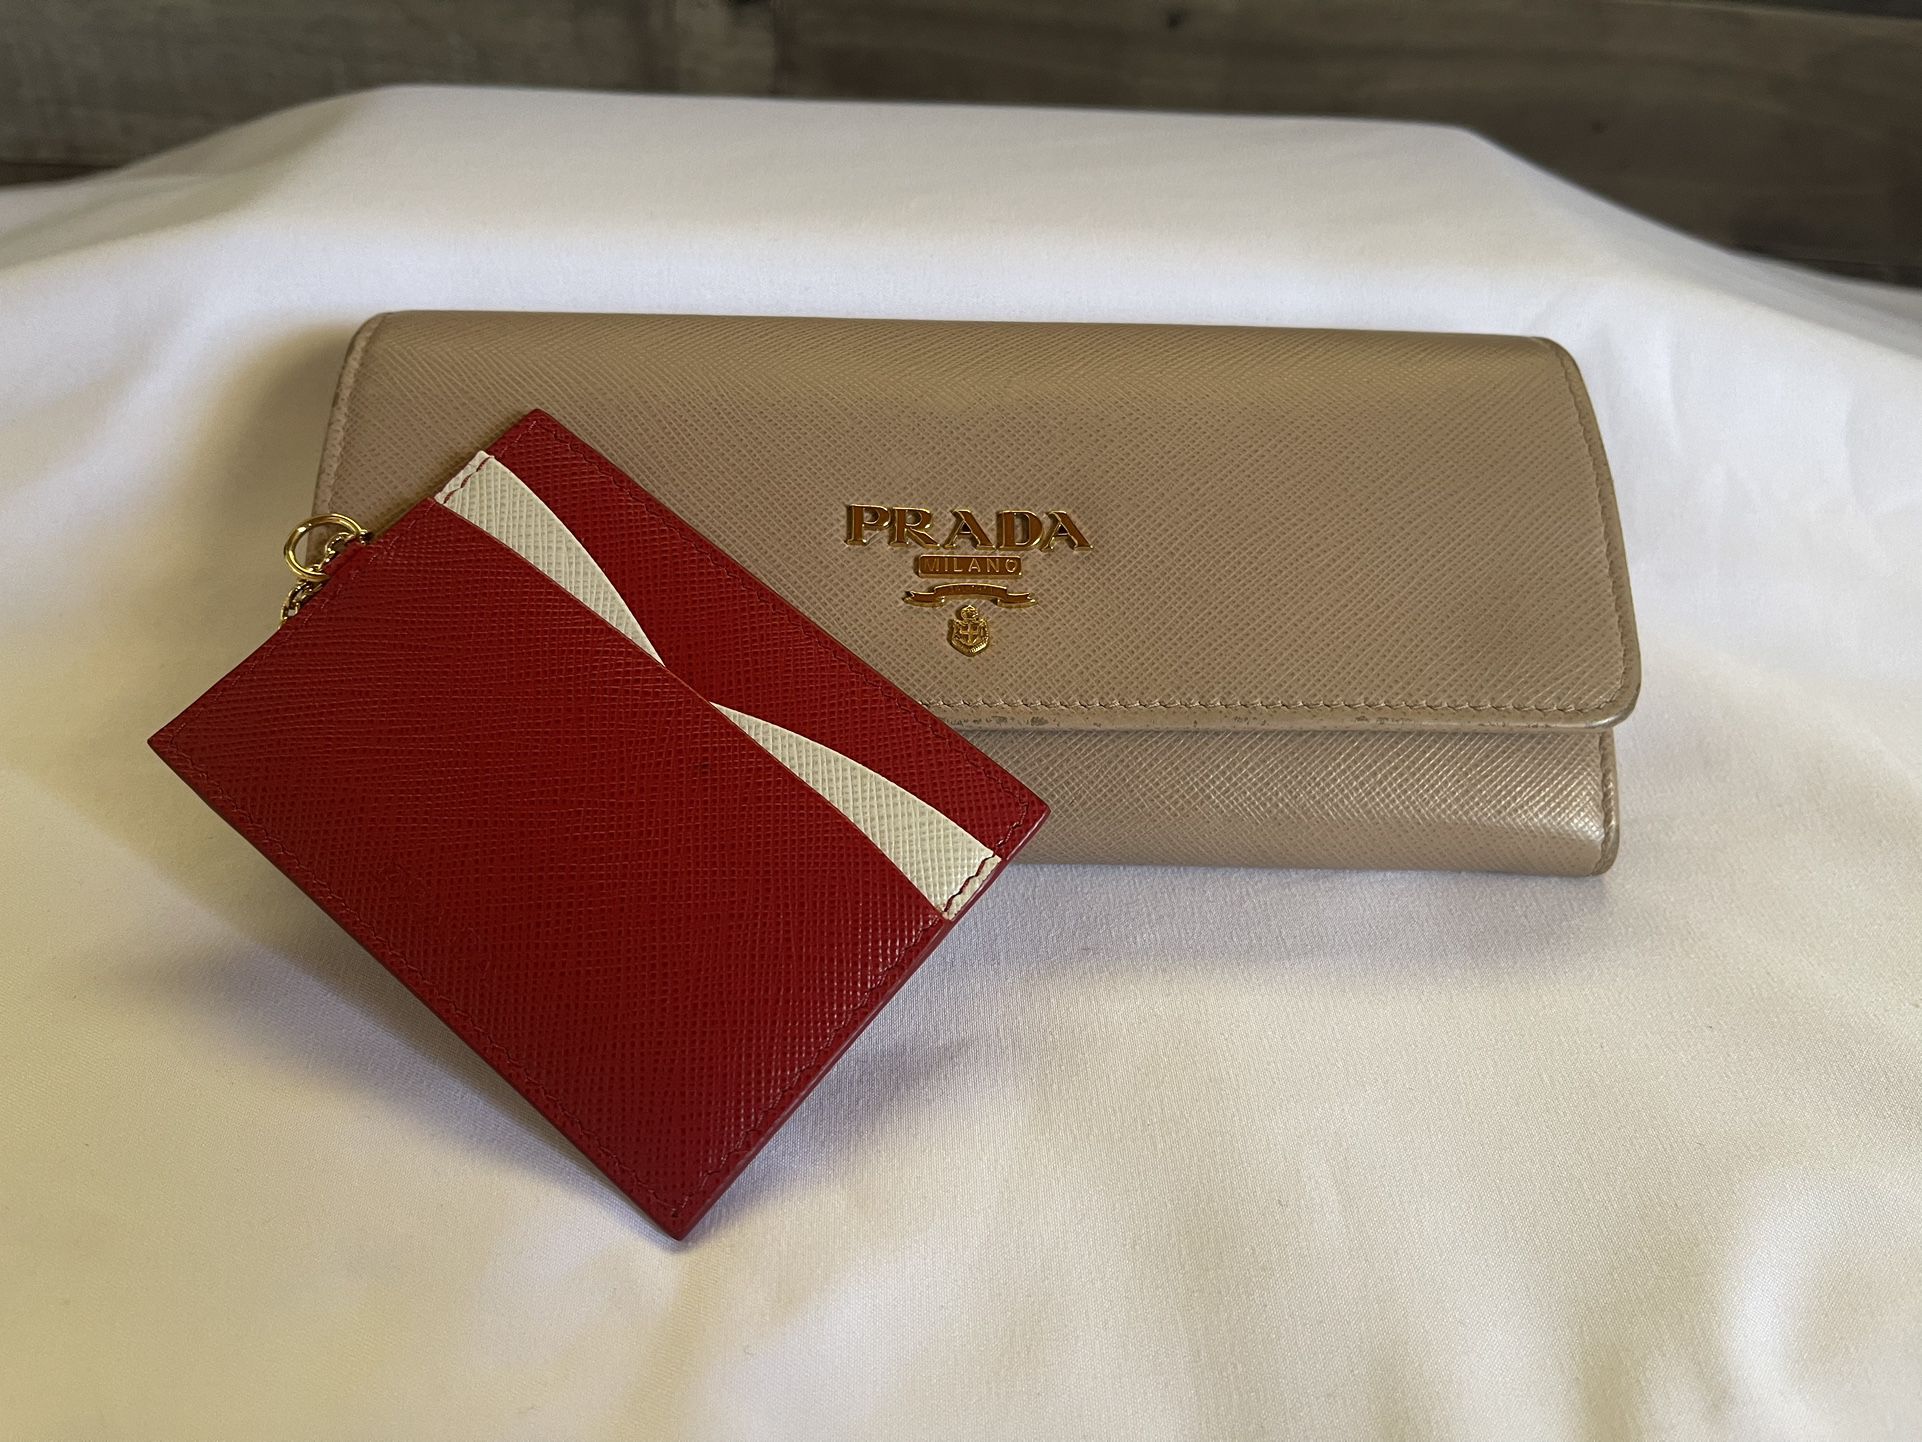 Powder Pink/fiery Red Saffiano Leather Card Holder